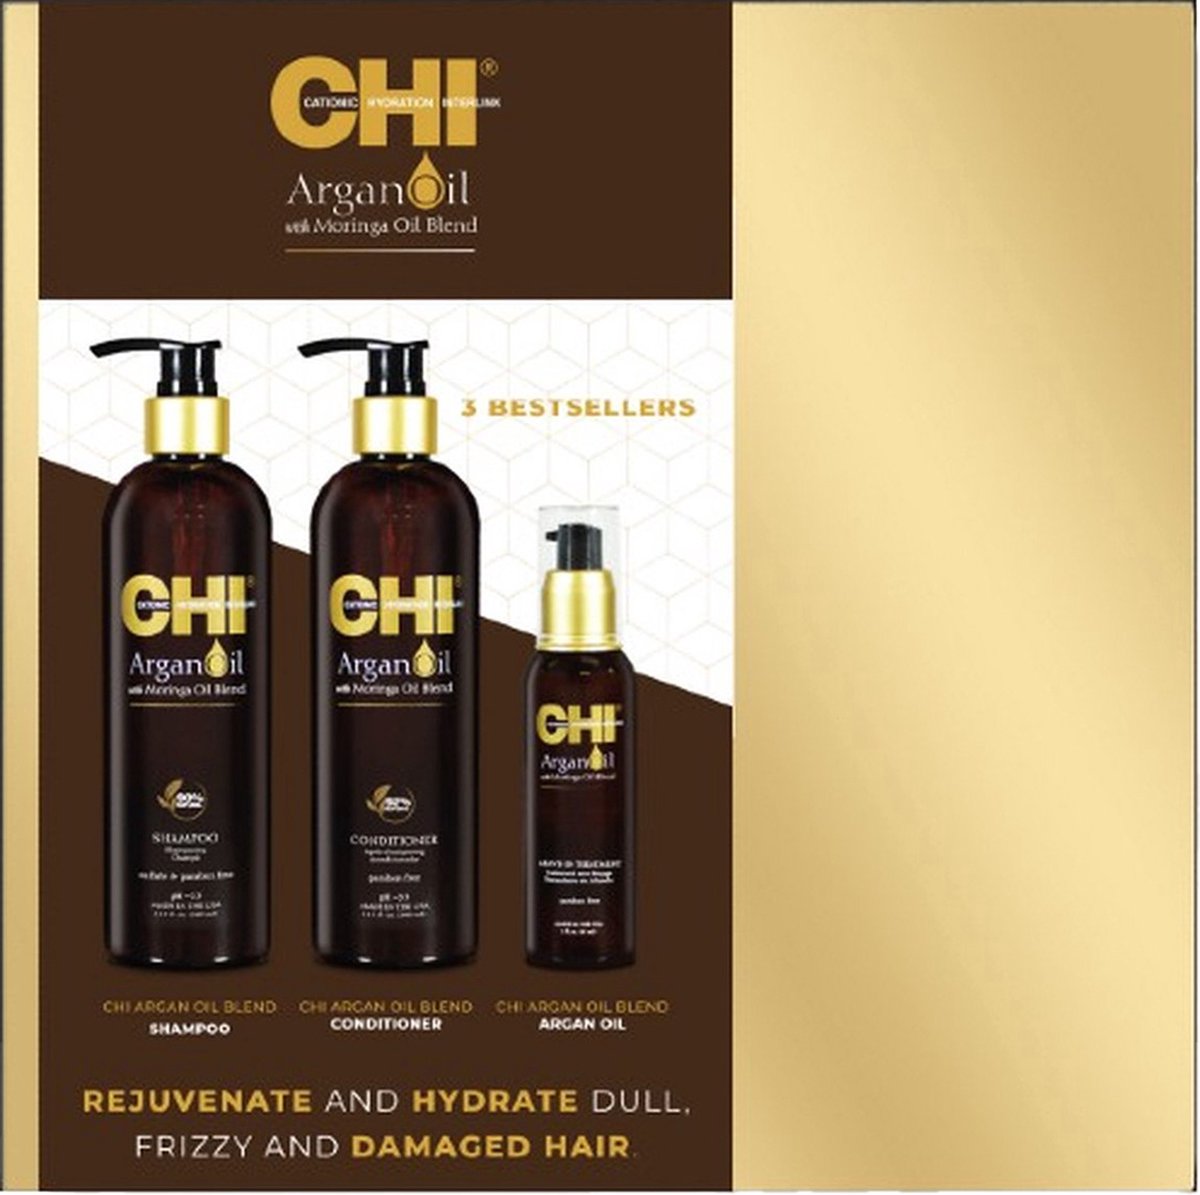 CHI Argan Oil - Shampoo - Conditioner - Leave-In Treatment - Holiday Gift Set